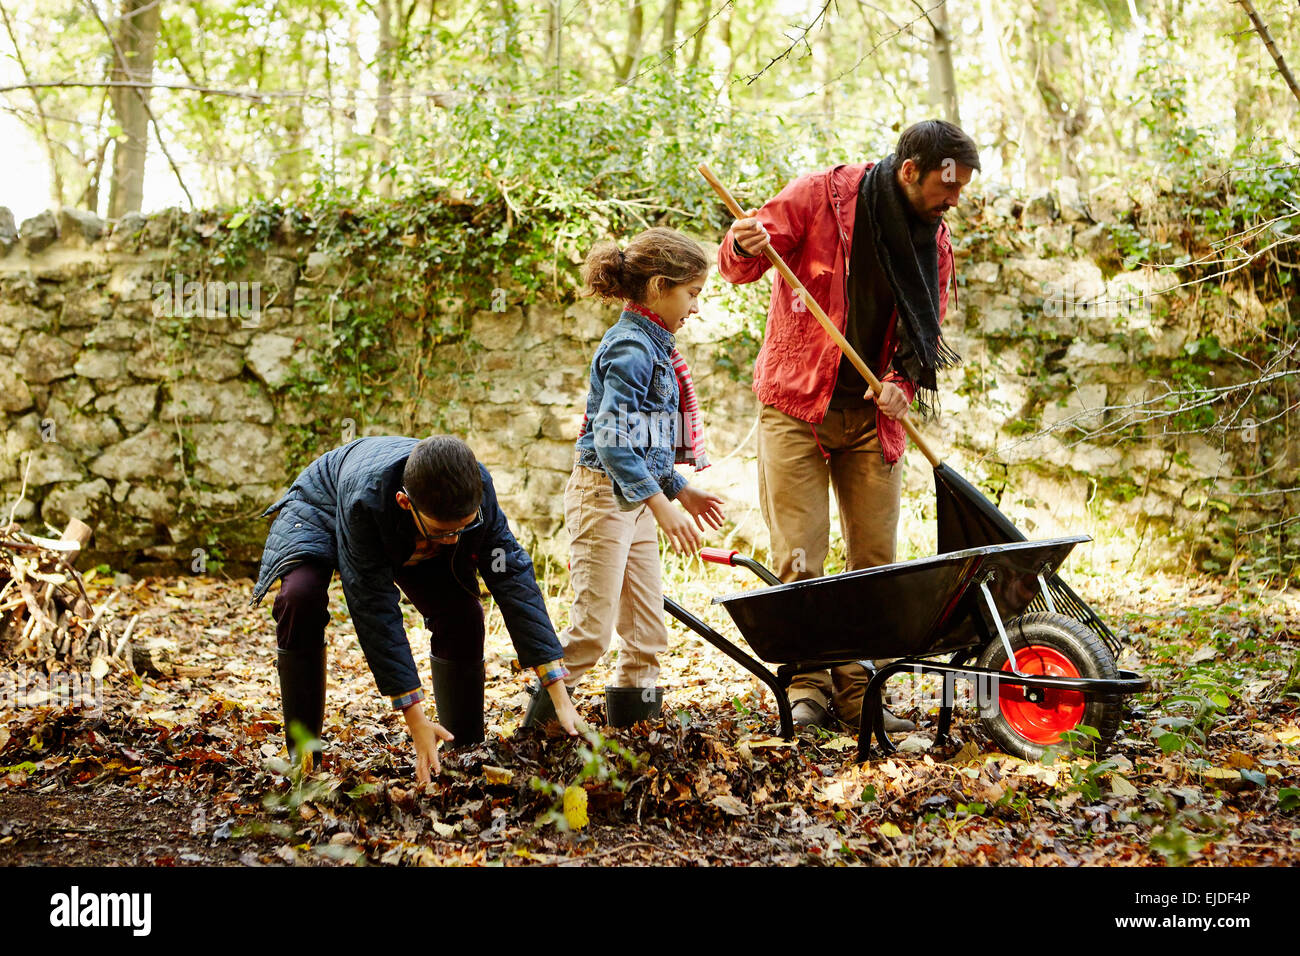 A family raking and scooping up leaves in autumn. Stock Photo